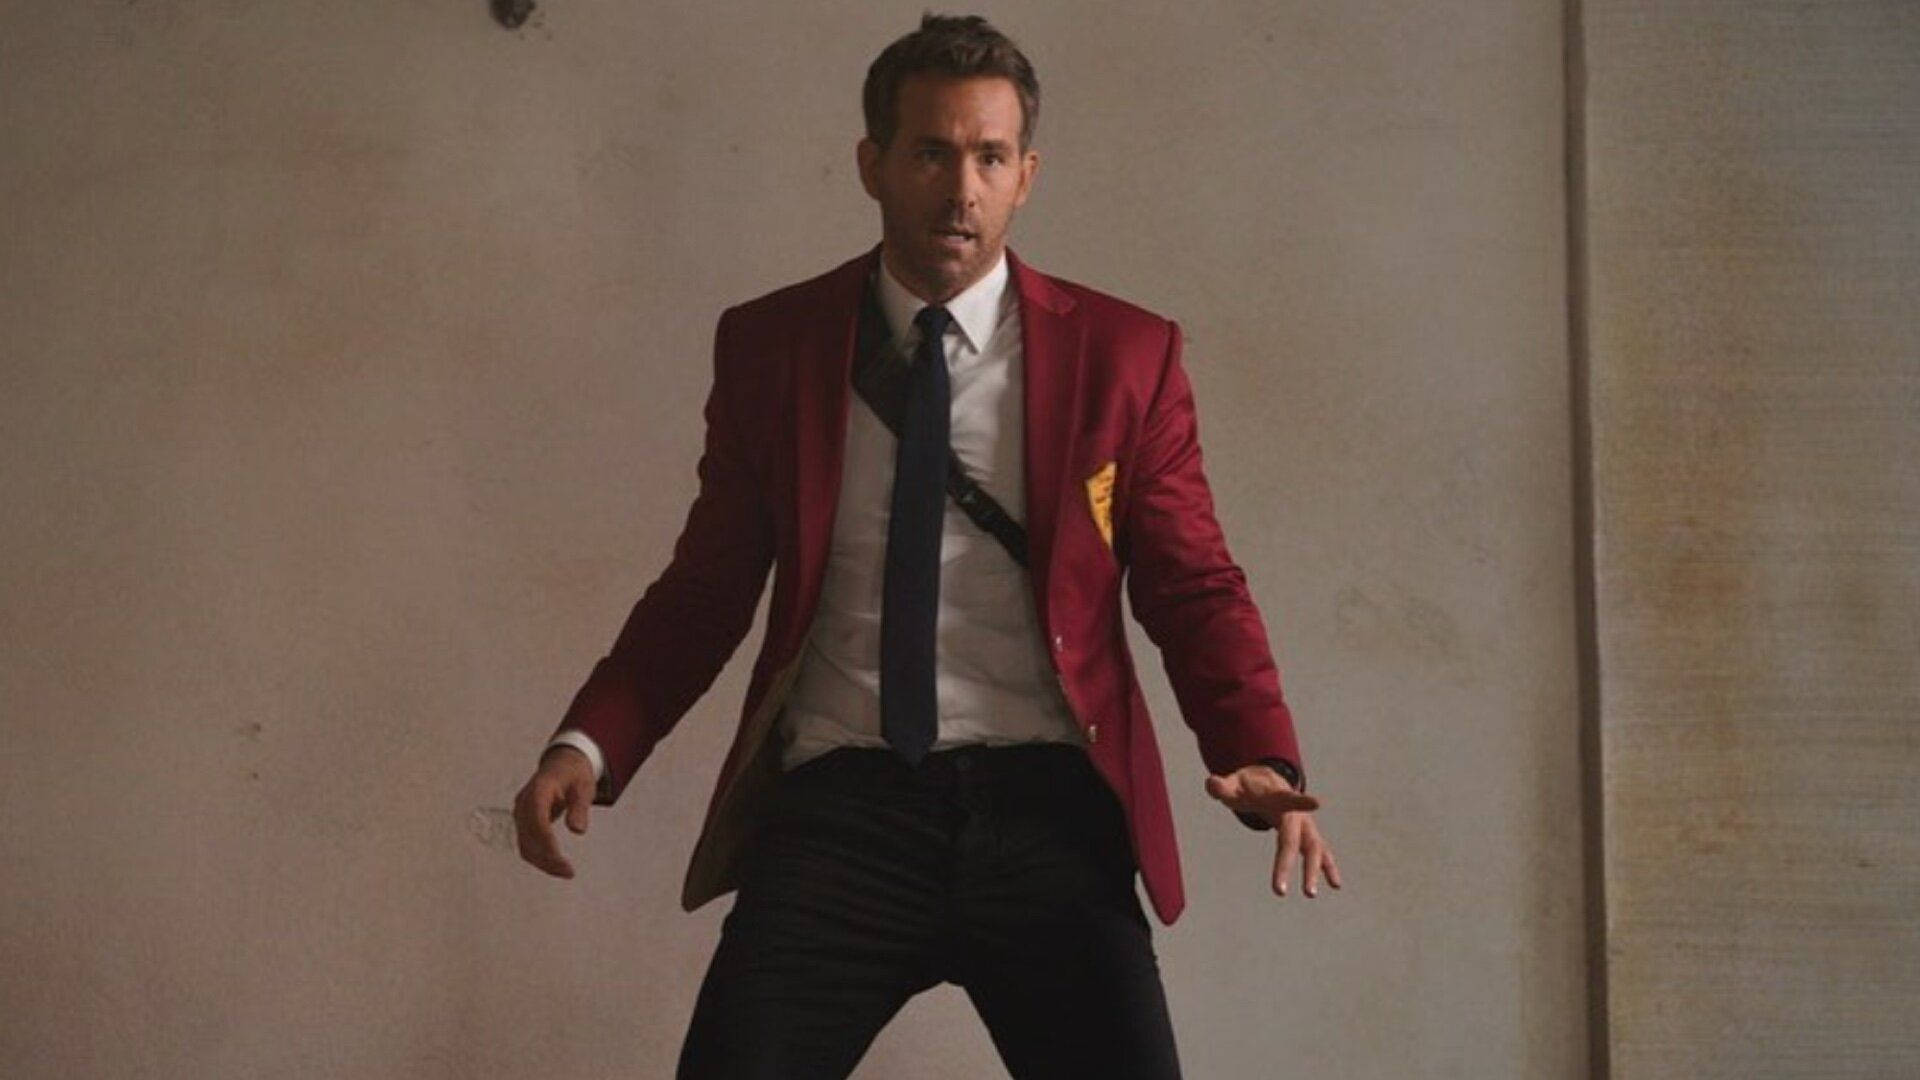 Action-packed shot from the movie "Red Notice" featuring Ryan Reynolds. Wallpaper